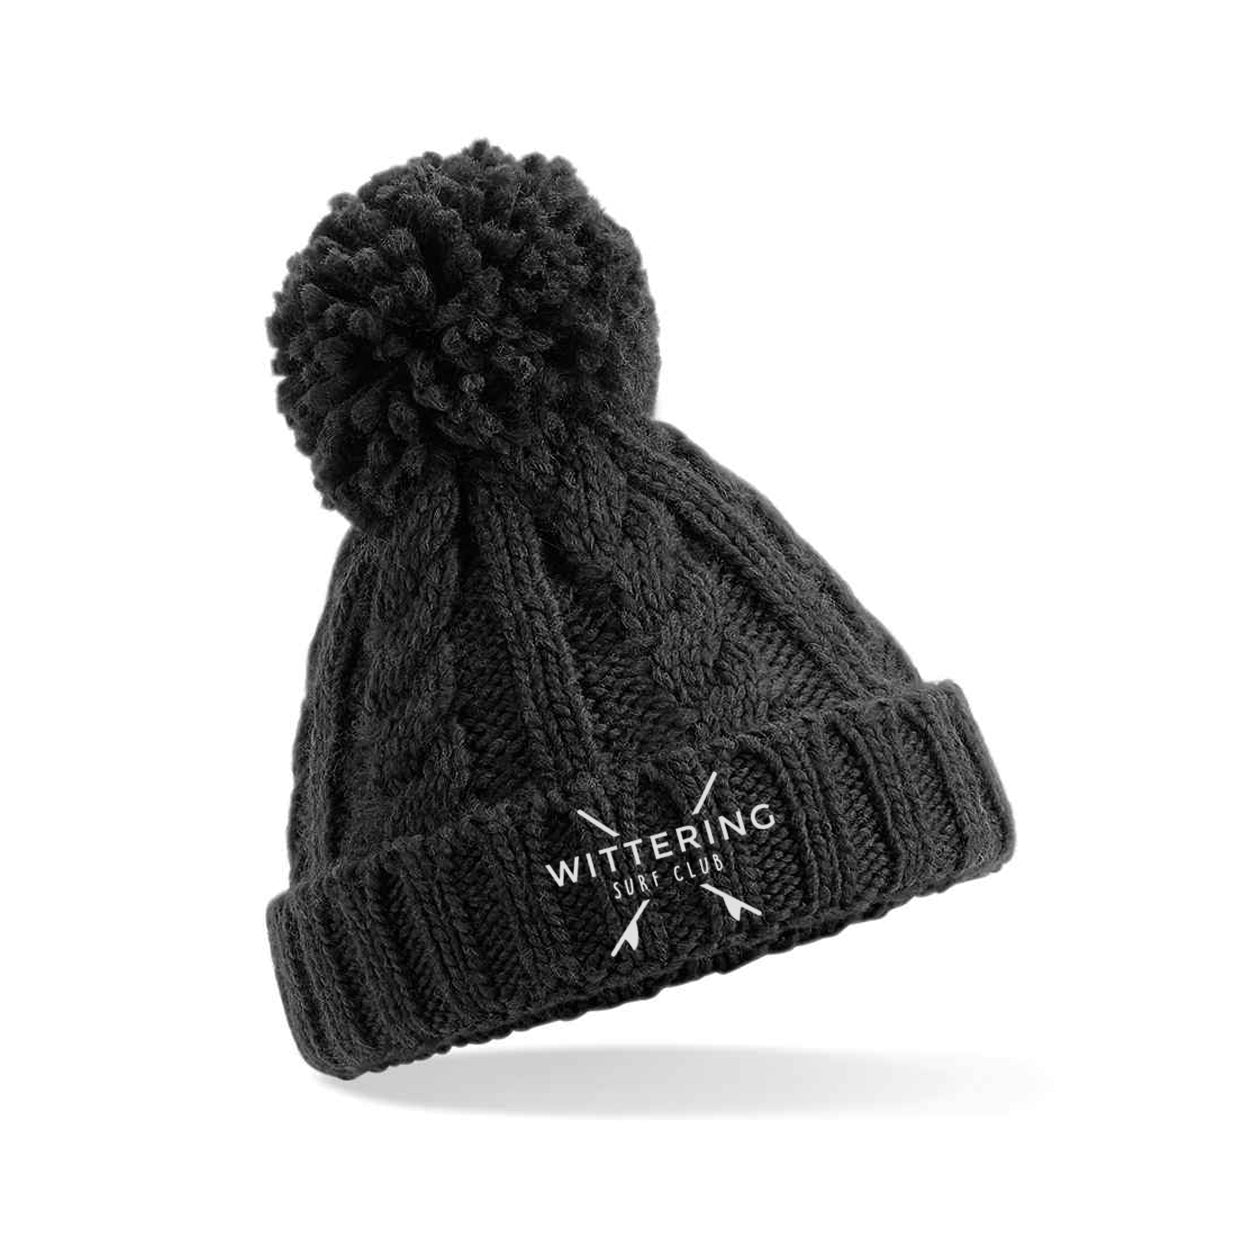 KIDS CHUNKY KNIT BEANIE - BLACK - Wittering Surf Shop